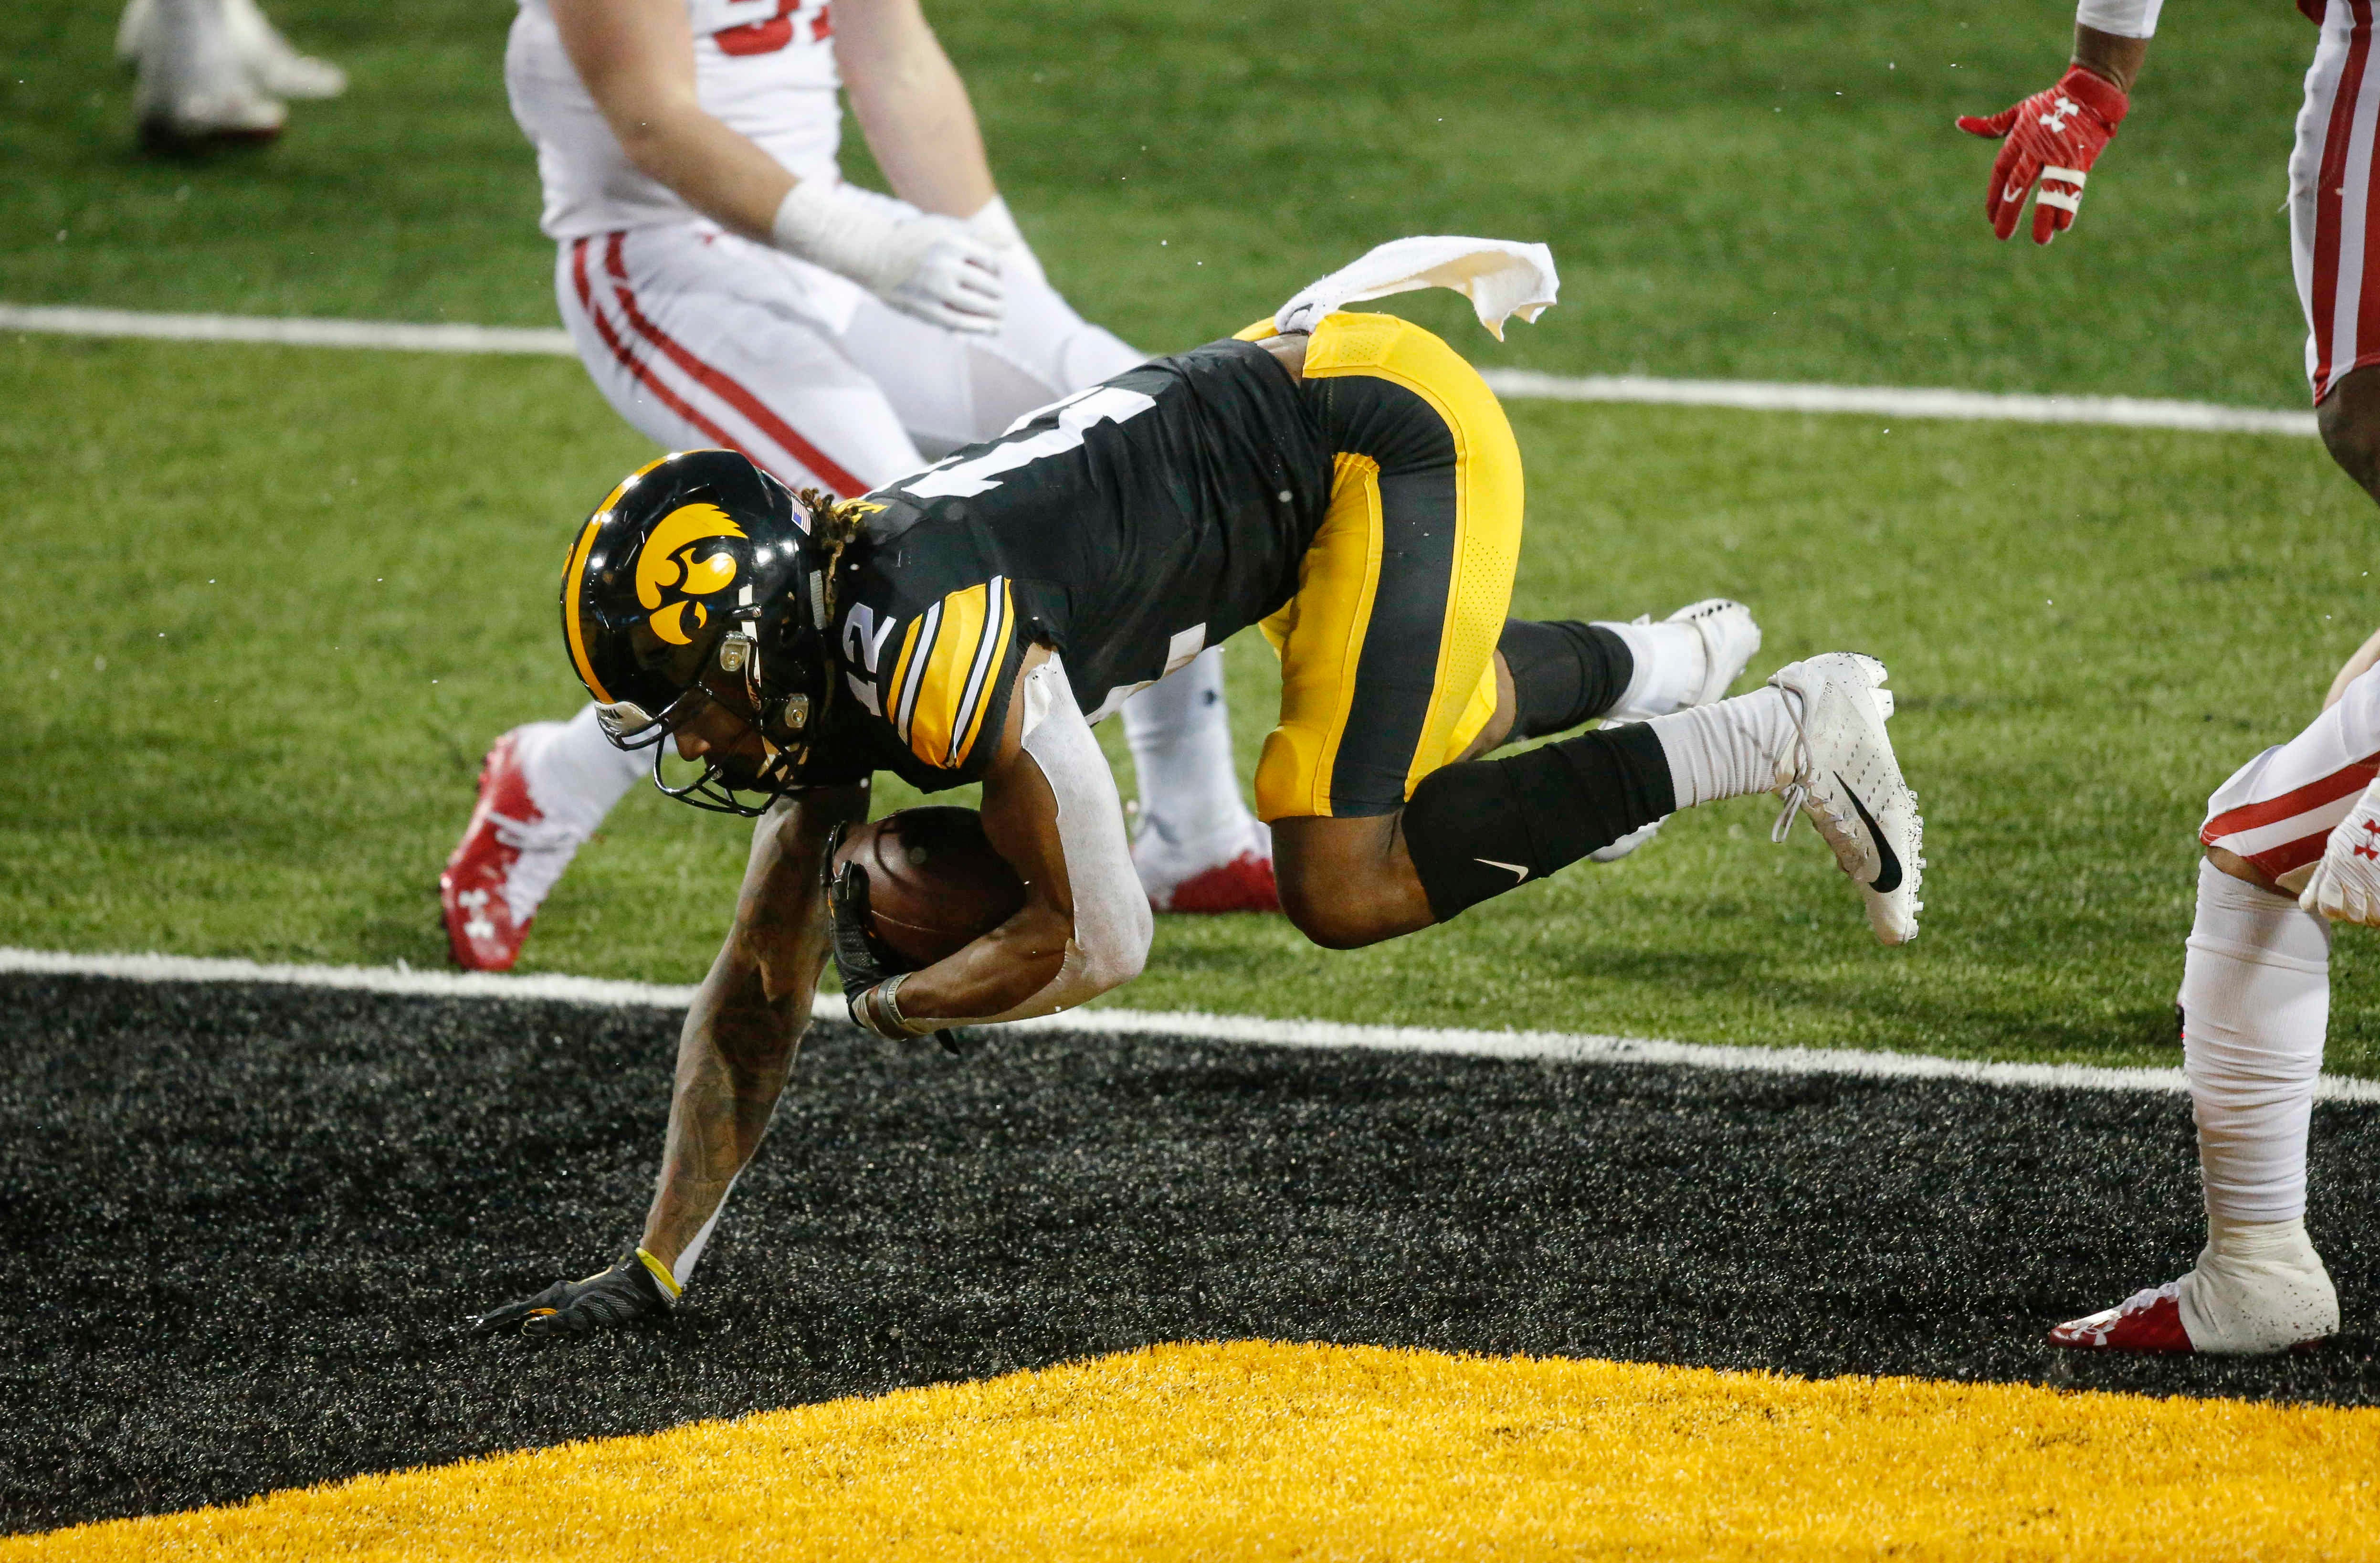 Iowa senior receiver Brandon Smith leaps into the endzone to complete a two-point conversion in the third quarter against Wisconsin on Saturday, Dec. 12, 2020, at Kinnick Stadium in Iowa City, Iowa.